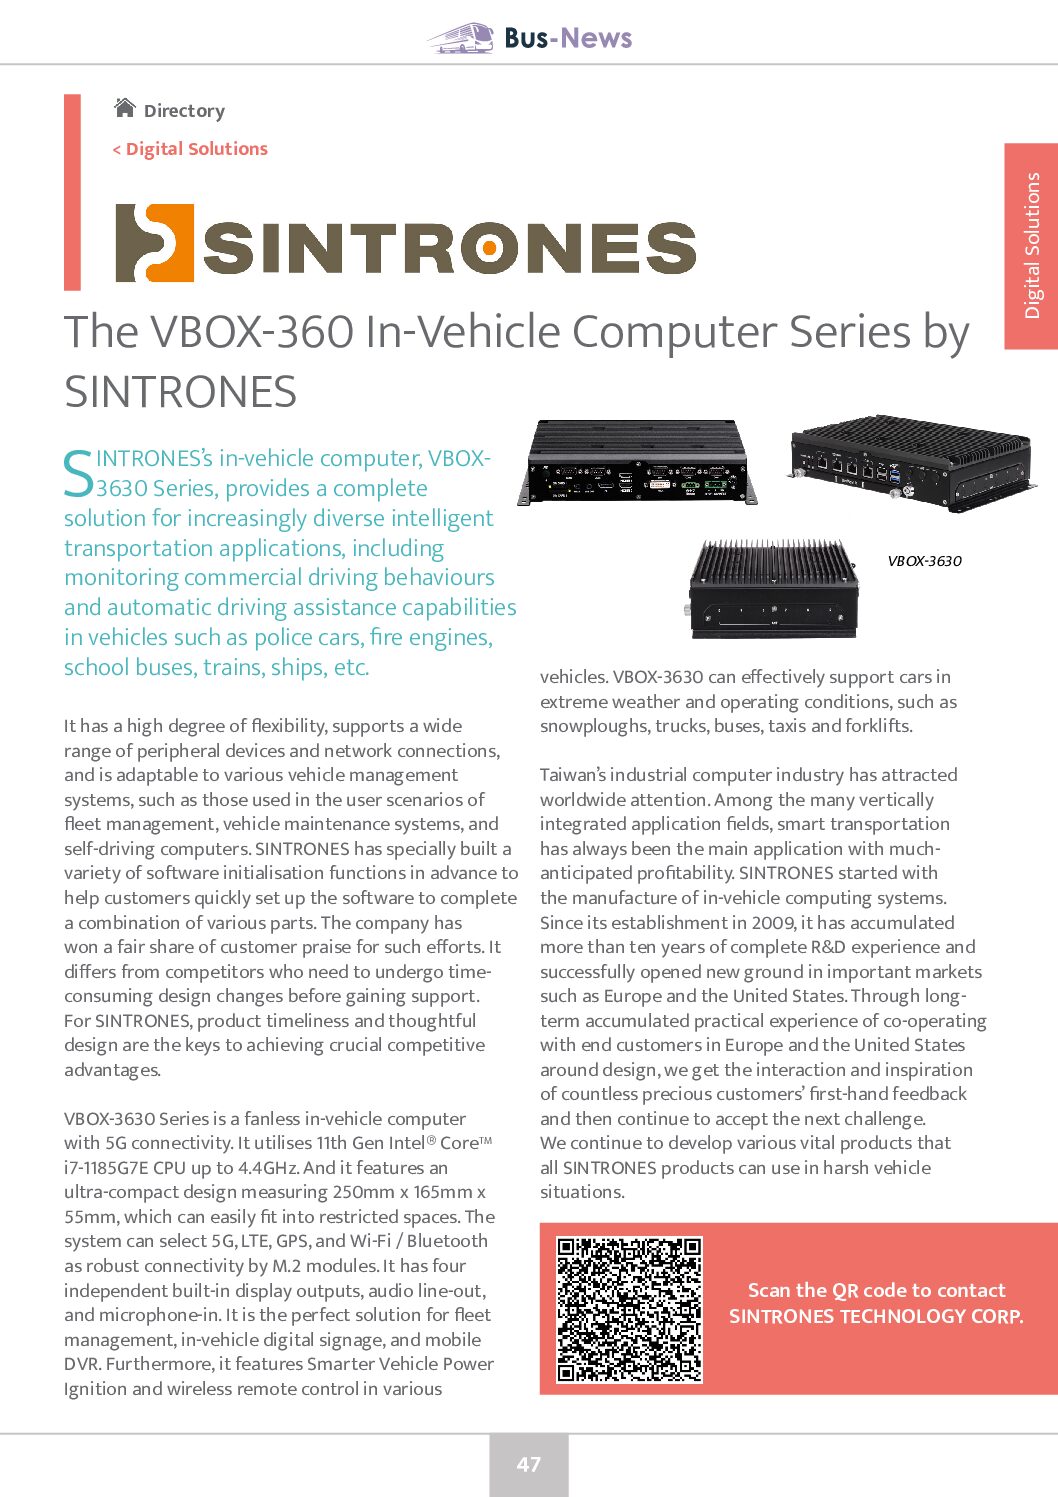 The VBOX-360 In-Vehicle Computer Series by SINTRONES